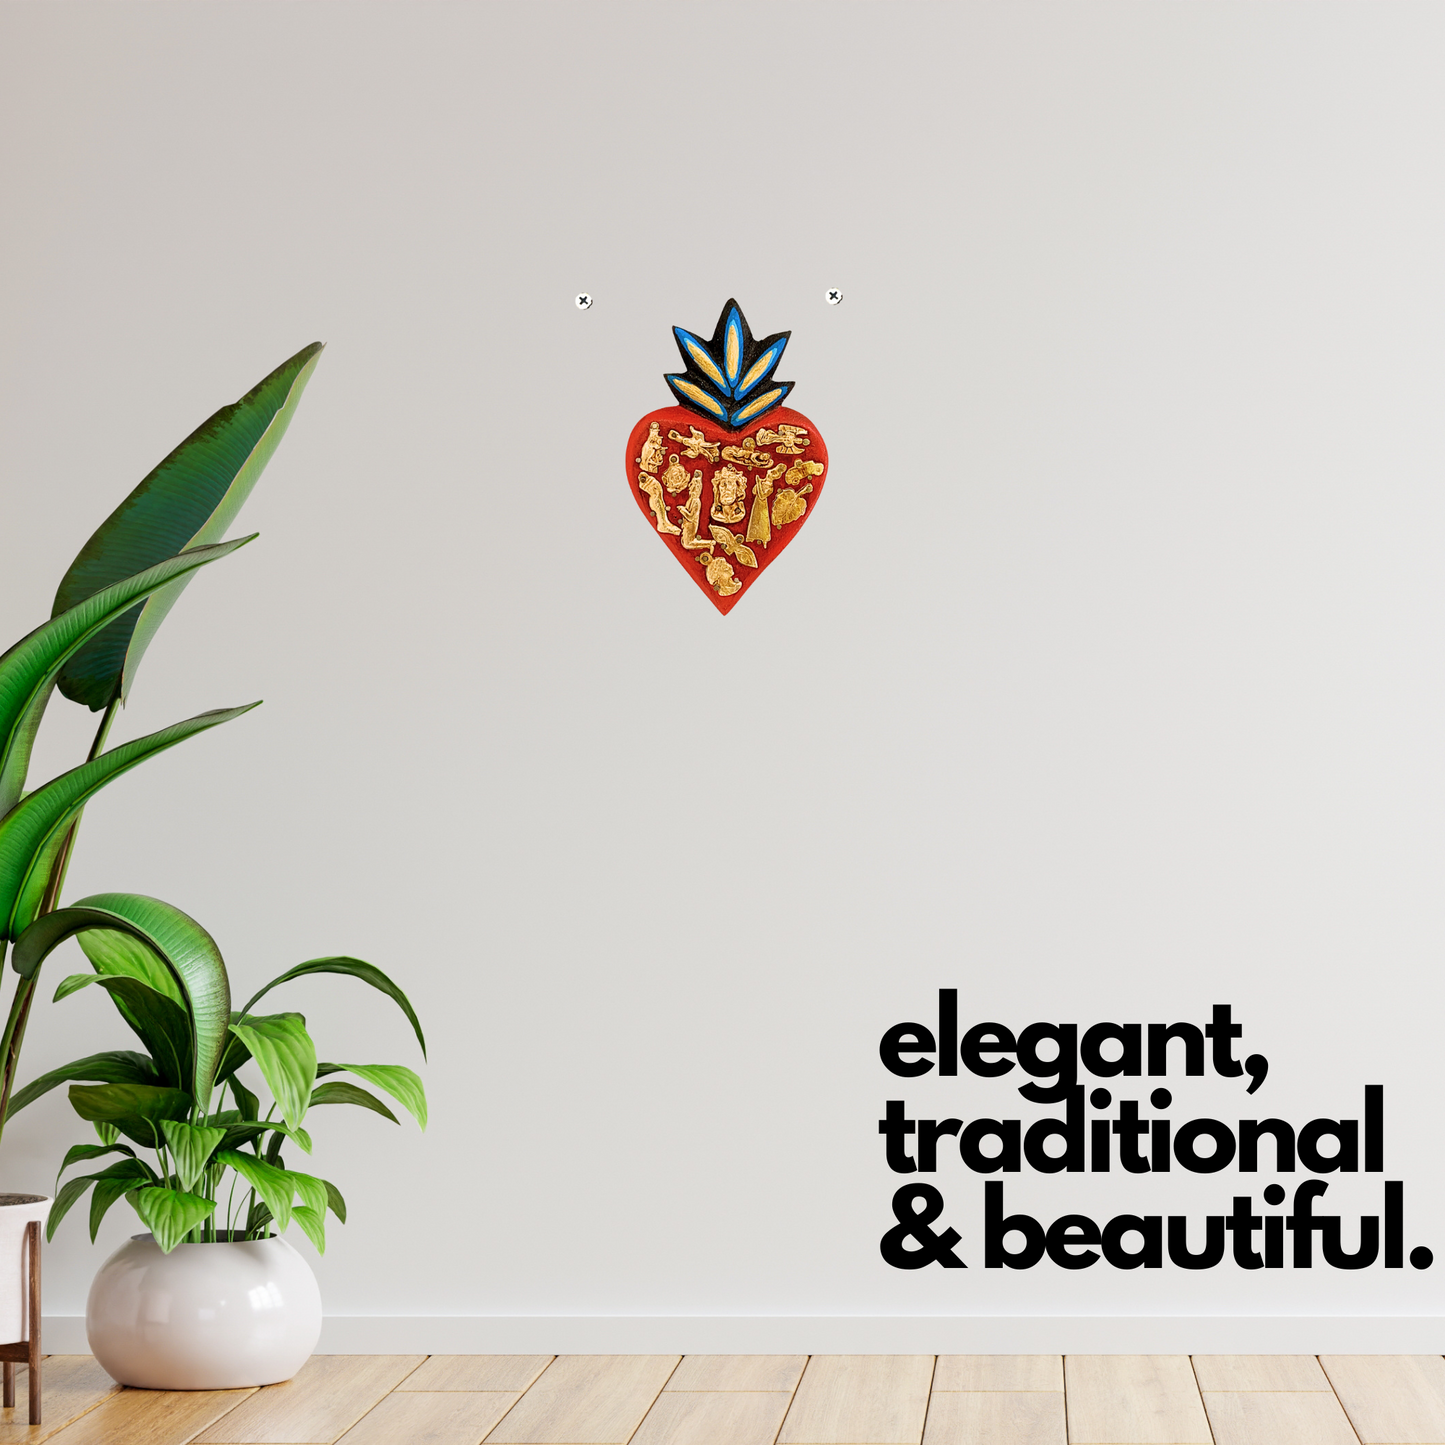 wall hanging Ex Voto Wooden Sacred Heart, hand-painted by Mexican artisans, featuring colorful milagros, perfect for wall decor and enhancing your space.